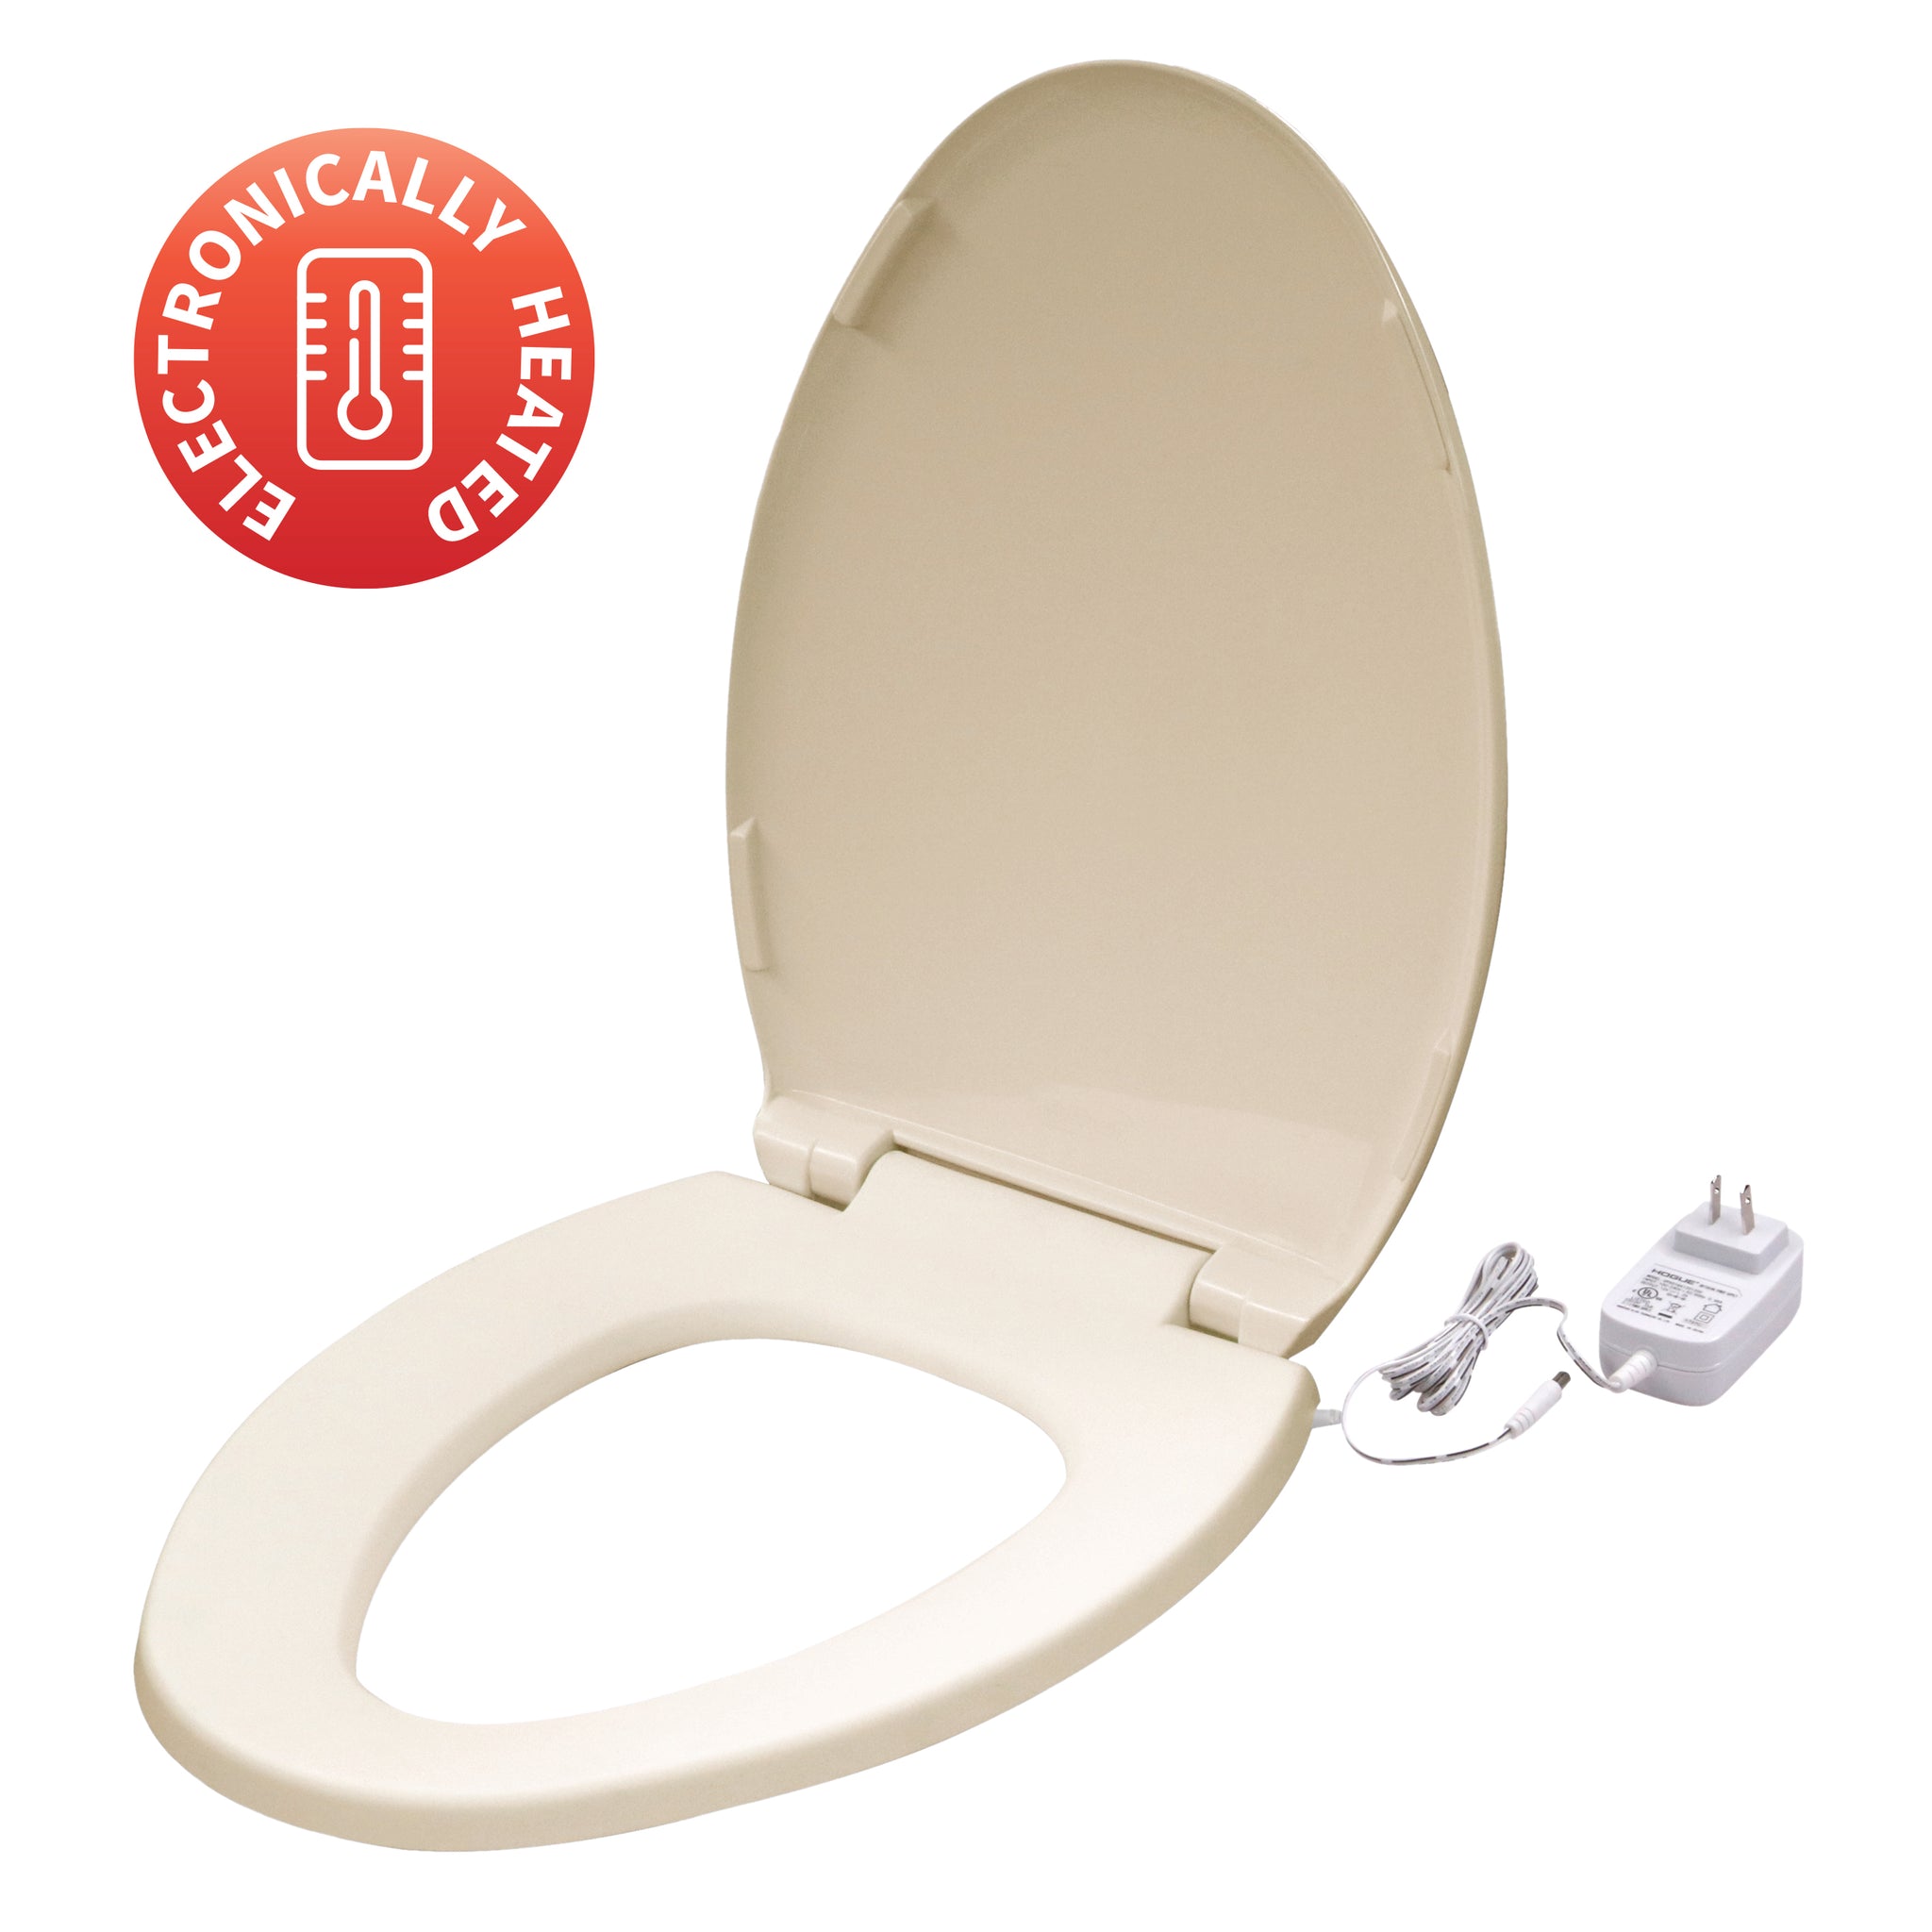 Heated Elongated Toilet Seat – Ultratouch Toilet Seats